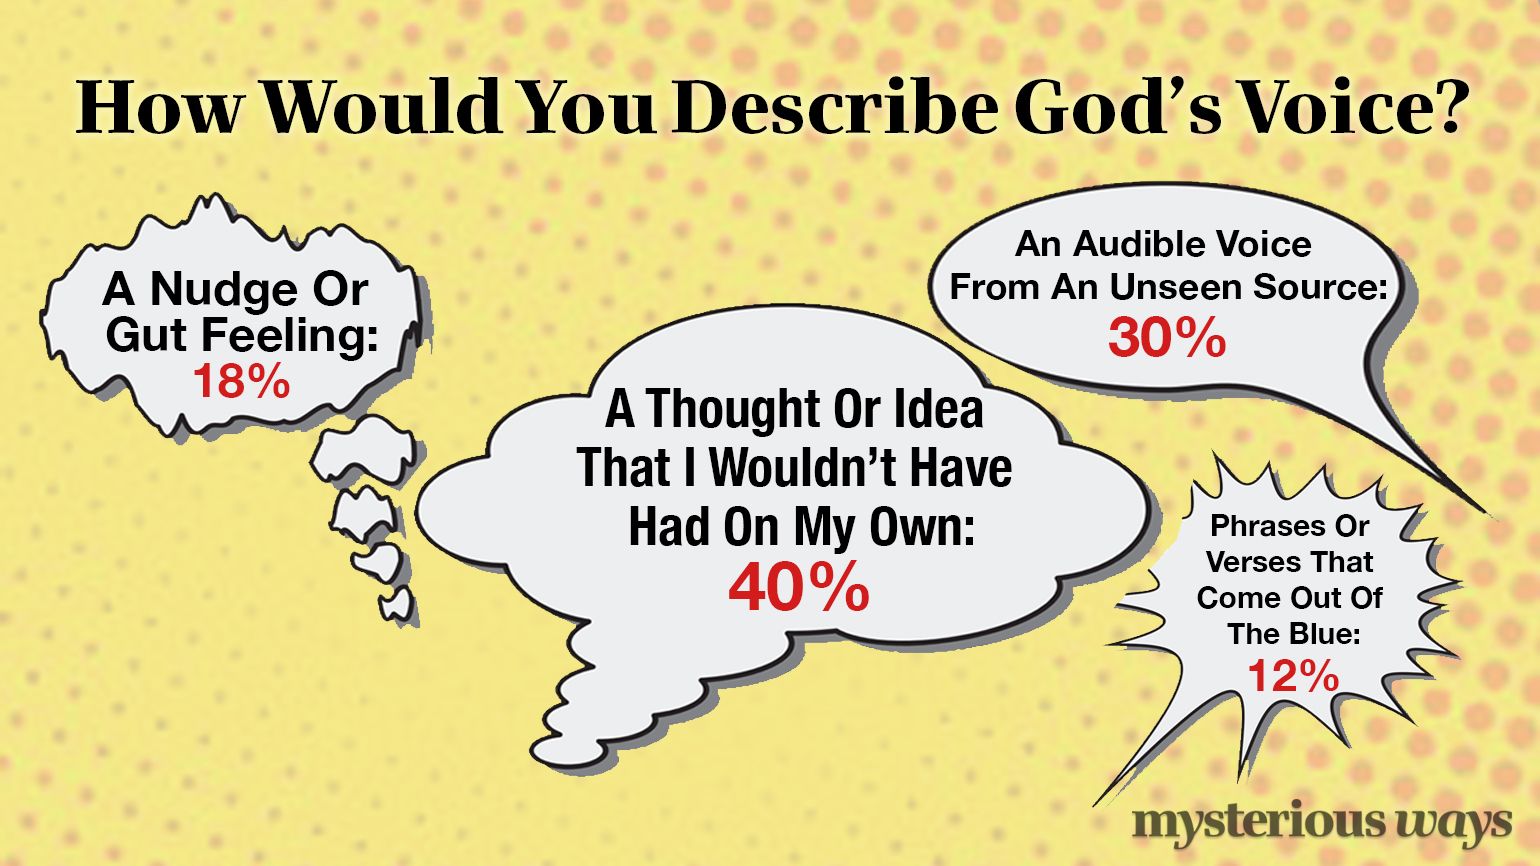 How Would You Describe God's Voice?